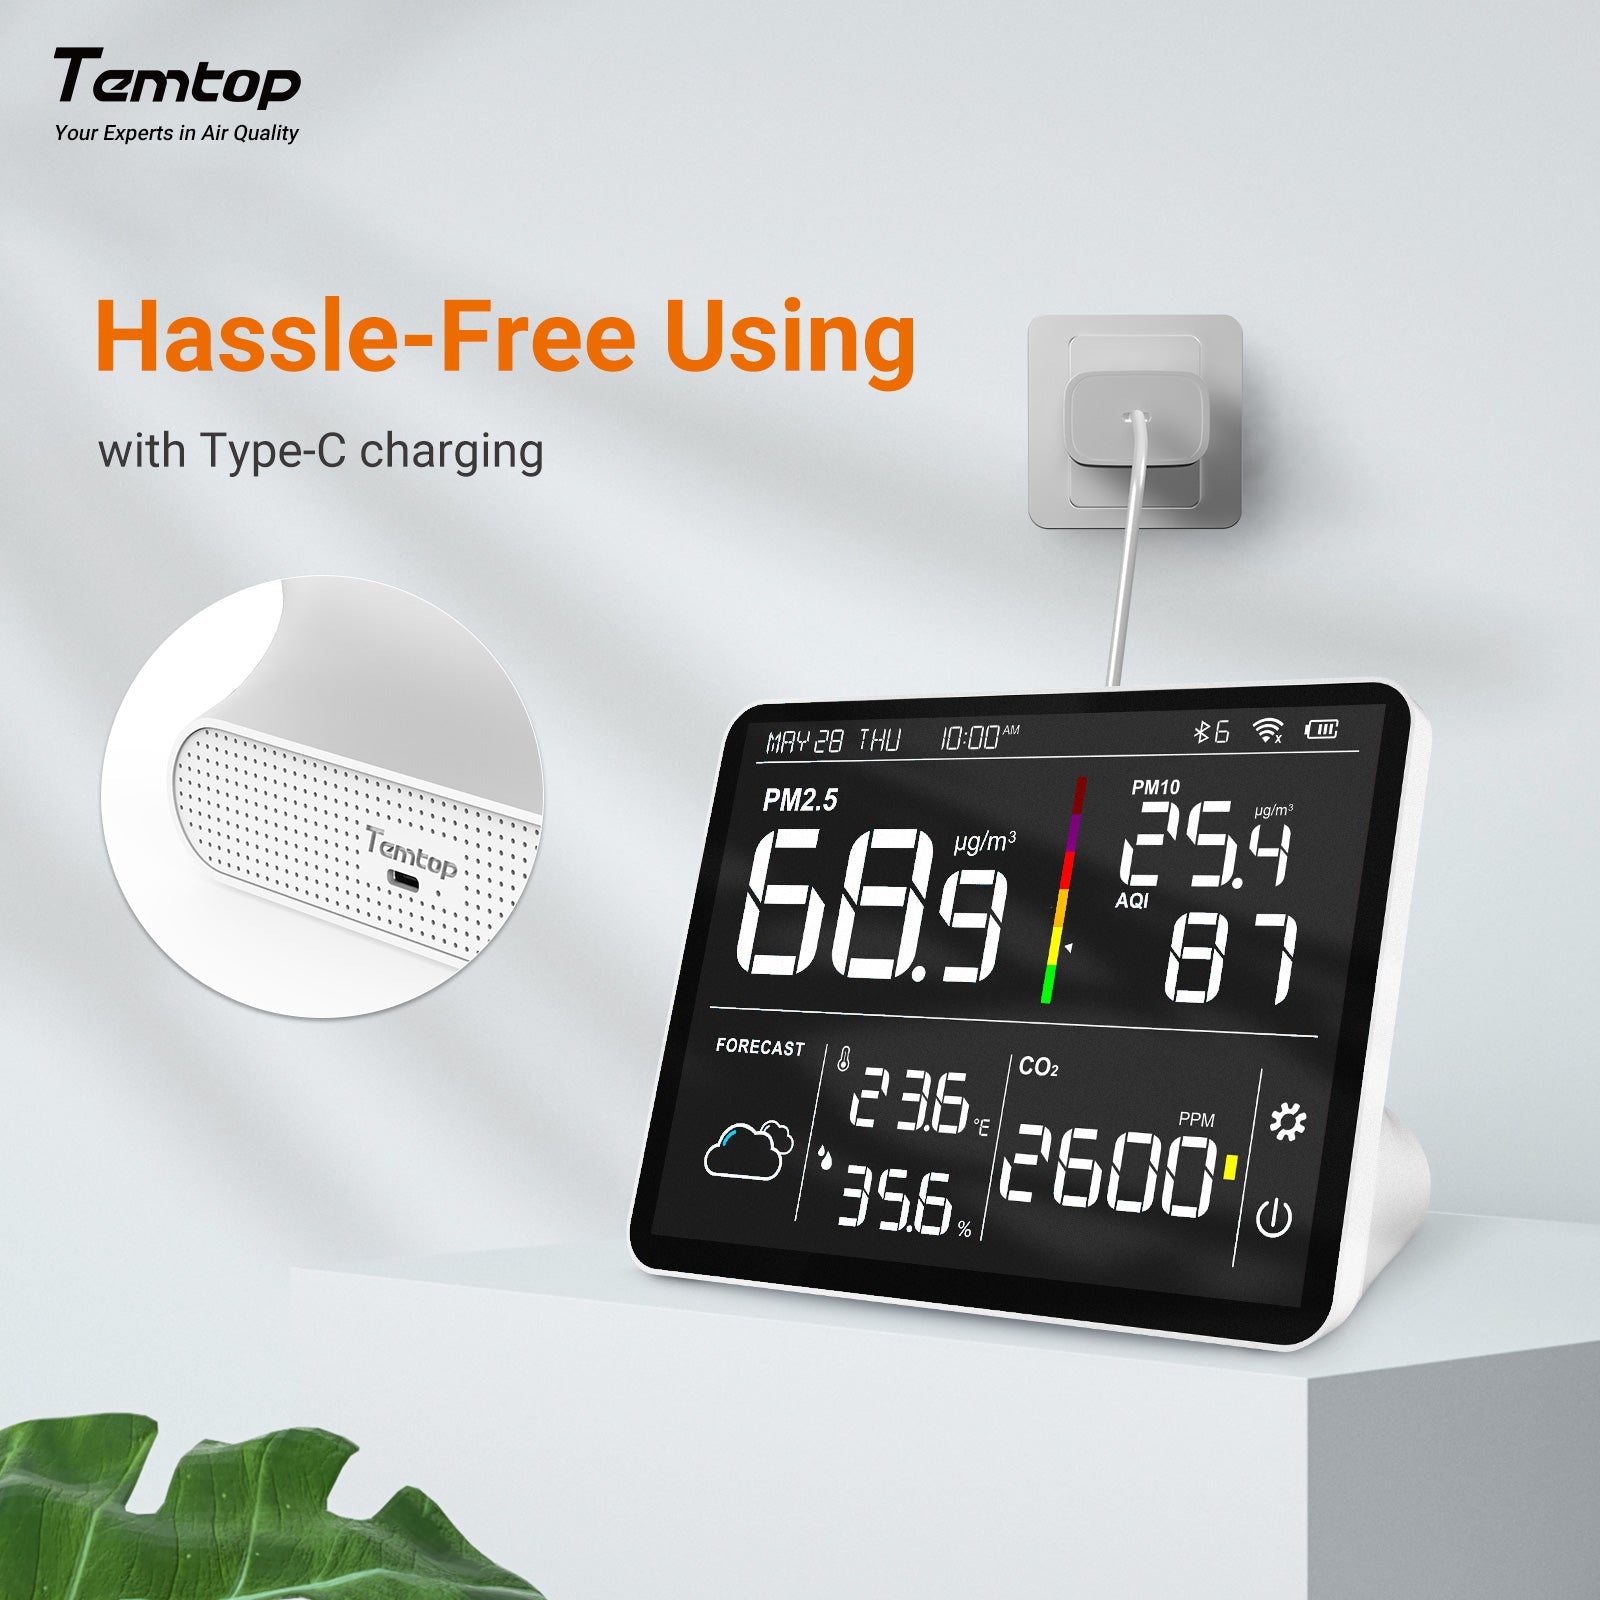 Temtop M2000 Air Quality Monitor, CO2, PM2.5, PM10